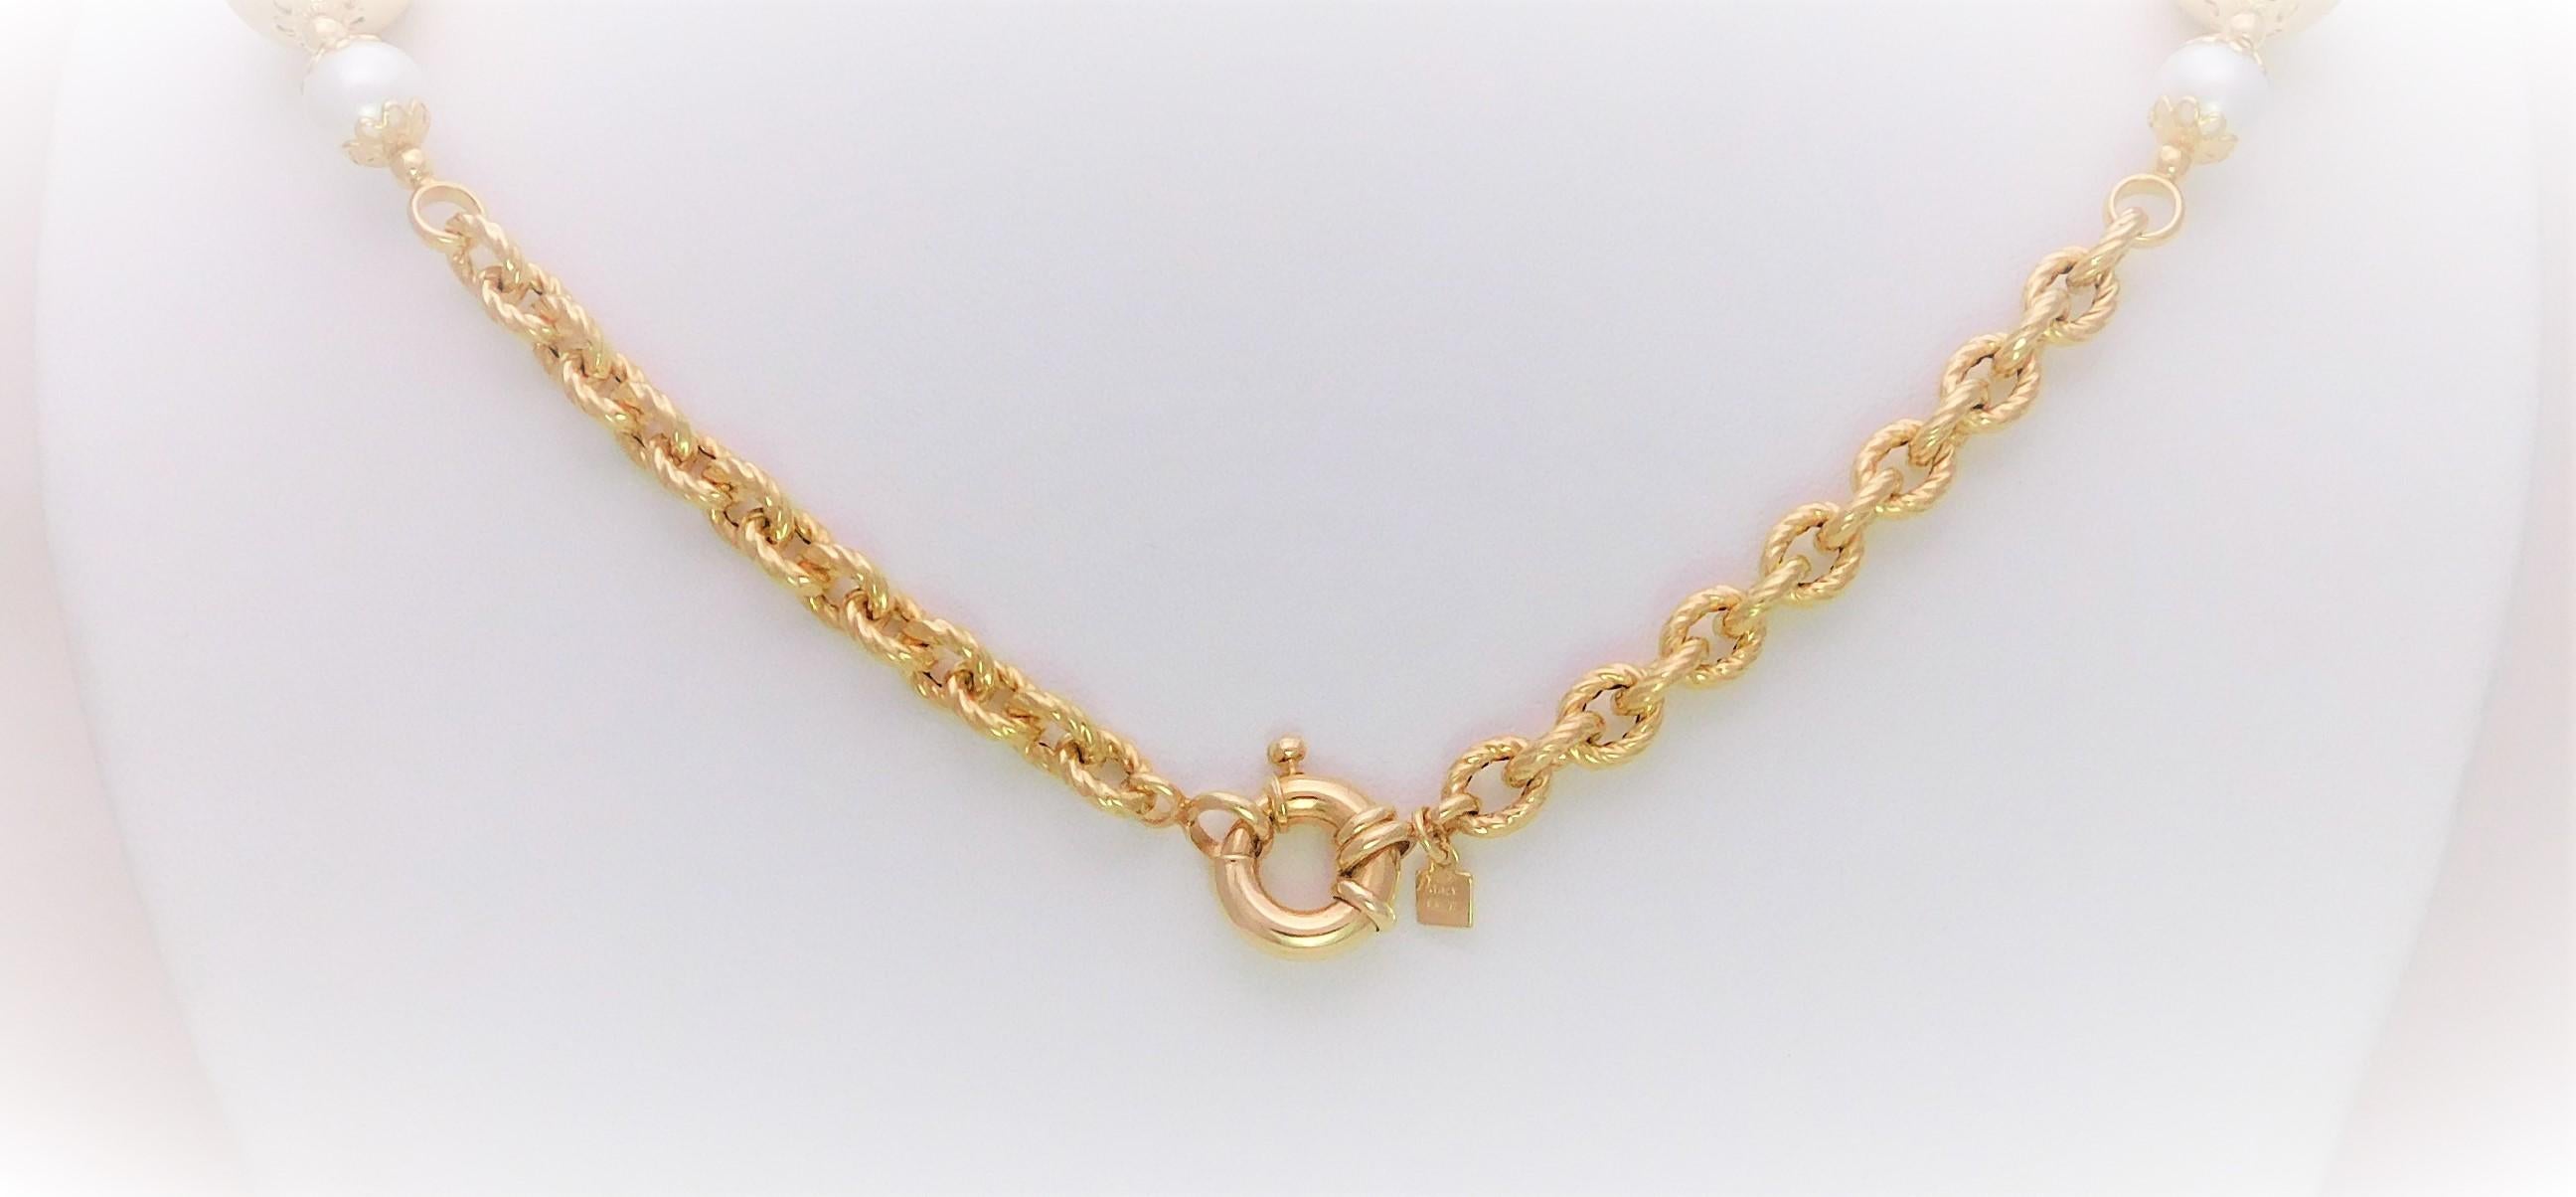 Victorian Italian 18 Karat Gold Necklace with AA Salt Water Pearls For Sale